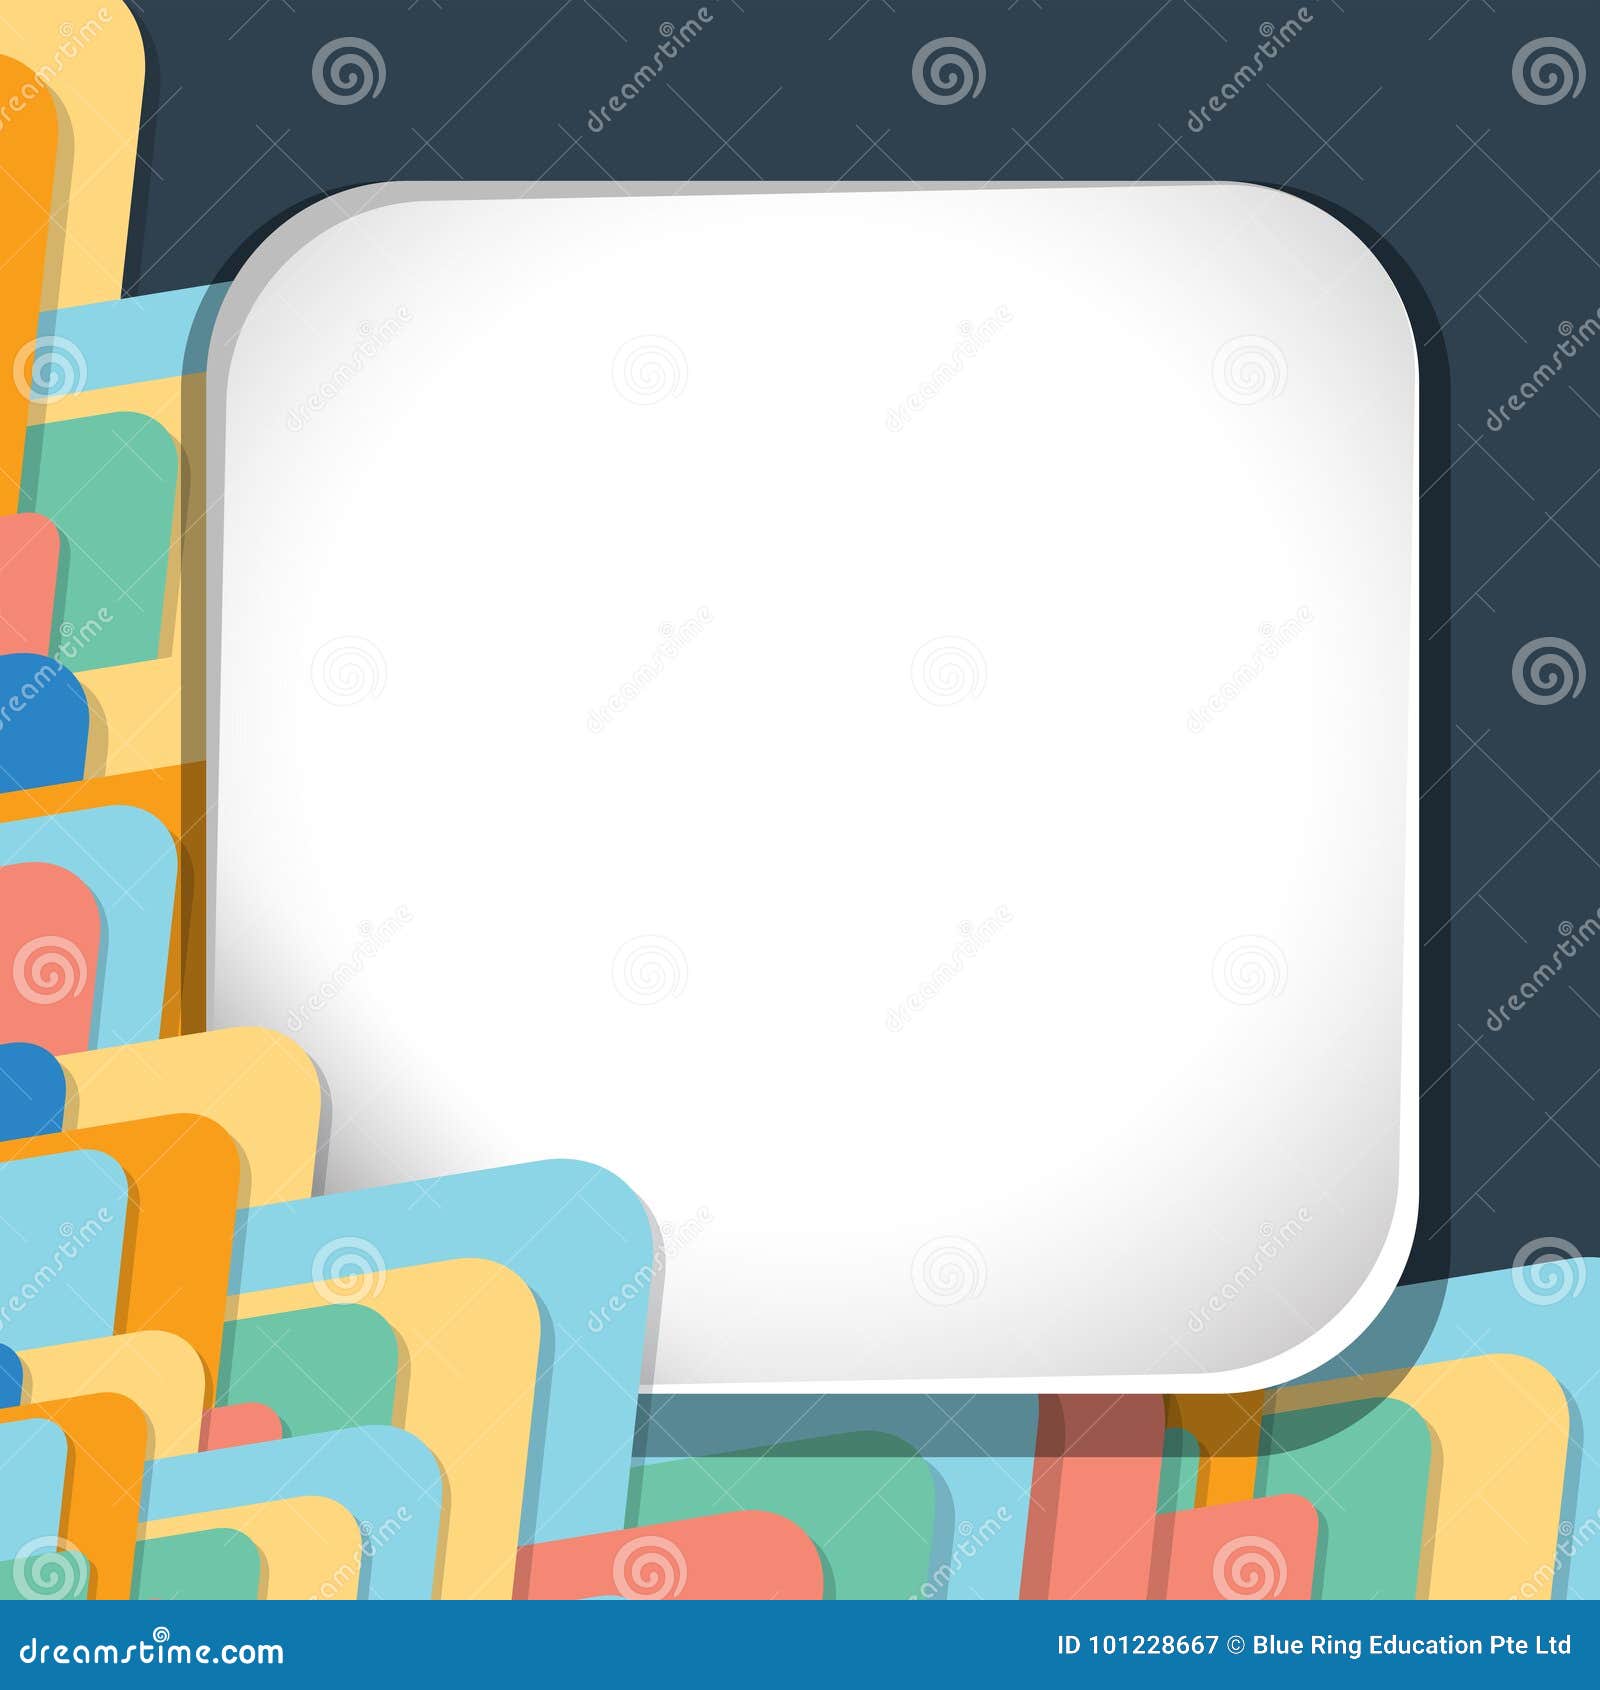 Border Template with Colorful Shapes in Background Stock Illustration ...